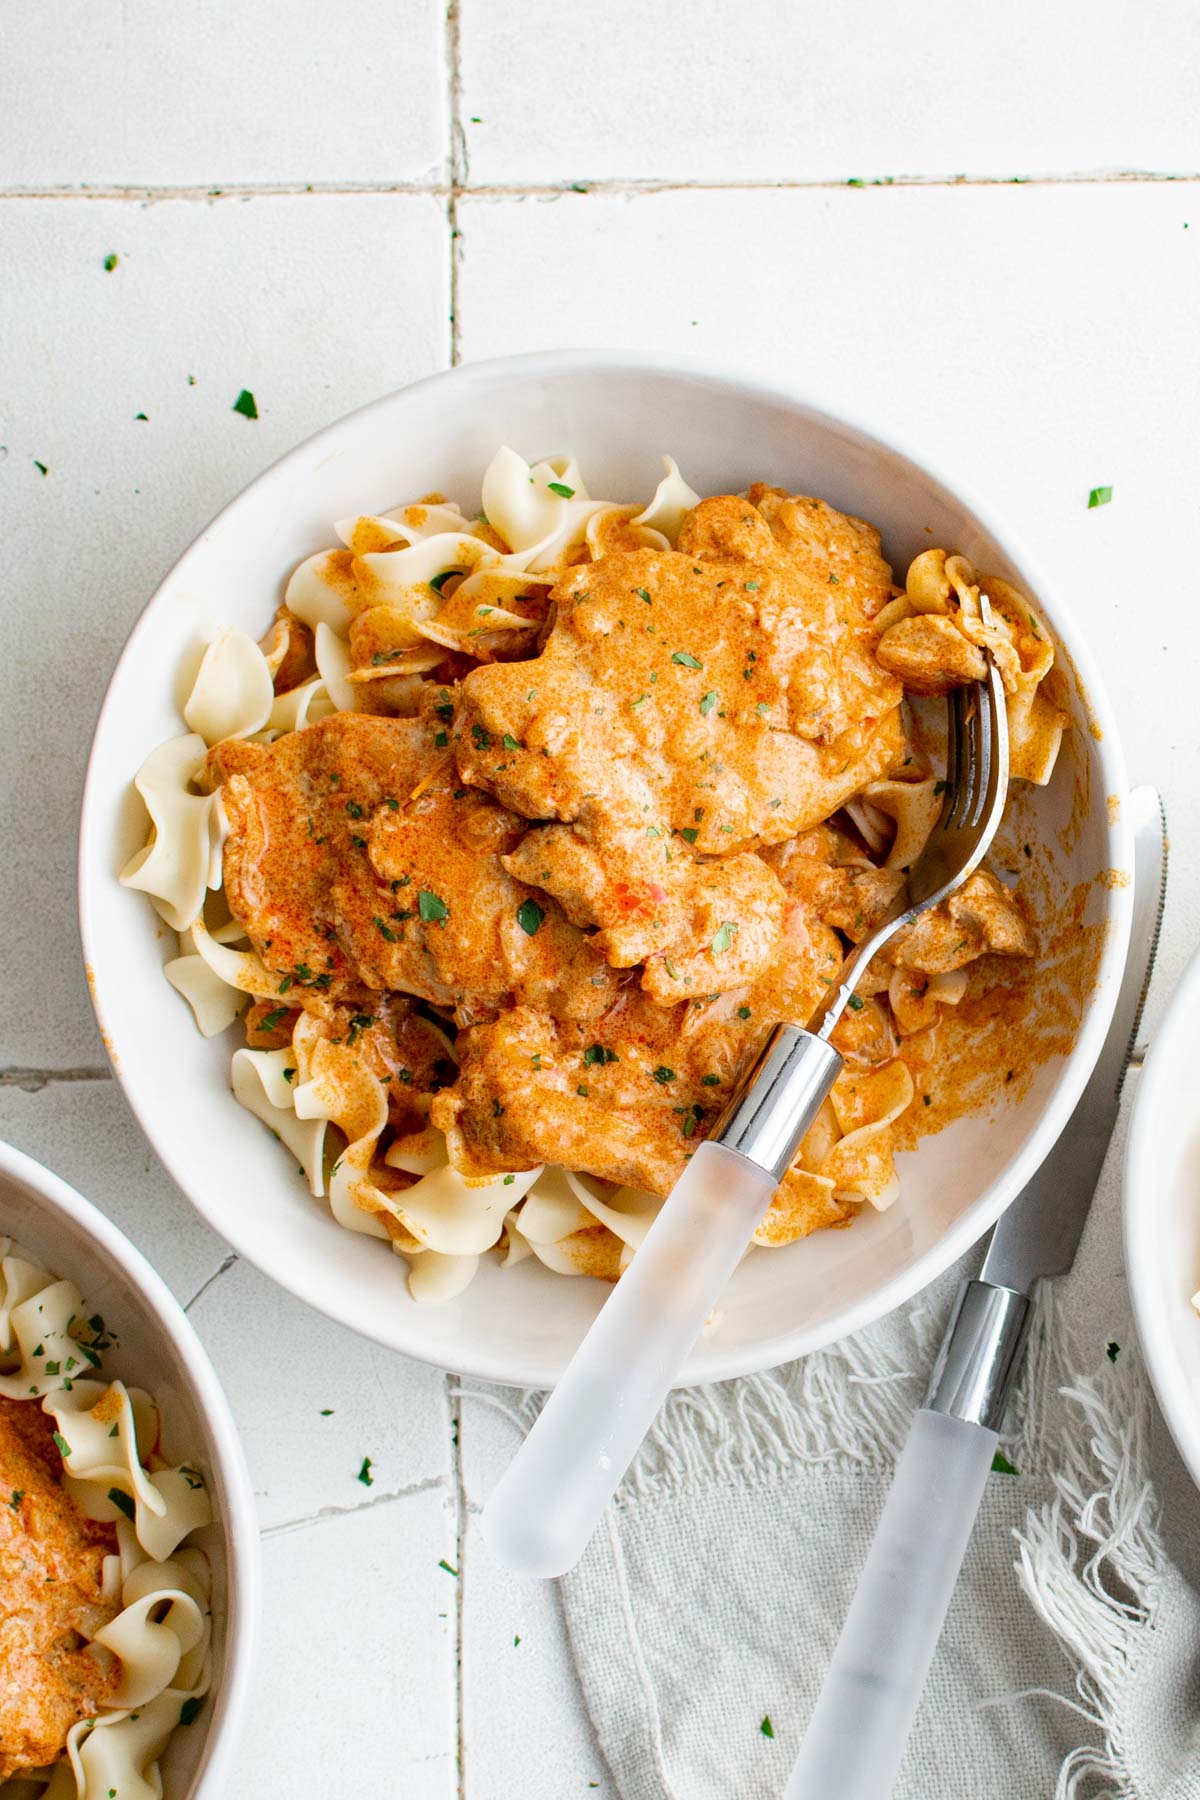 Chicken paprikash in a white bowl with egg noodles and a fork.